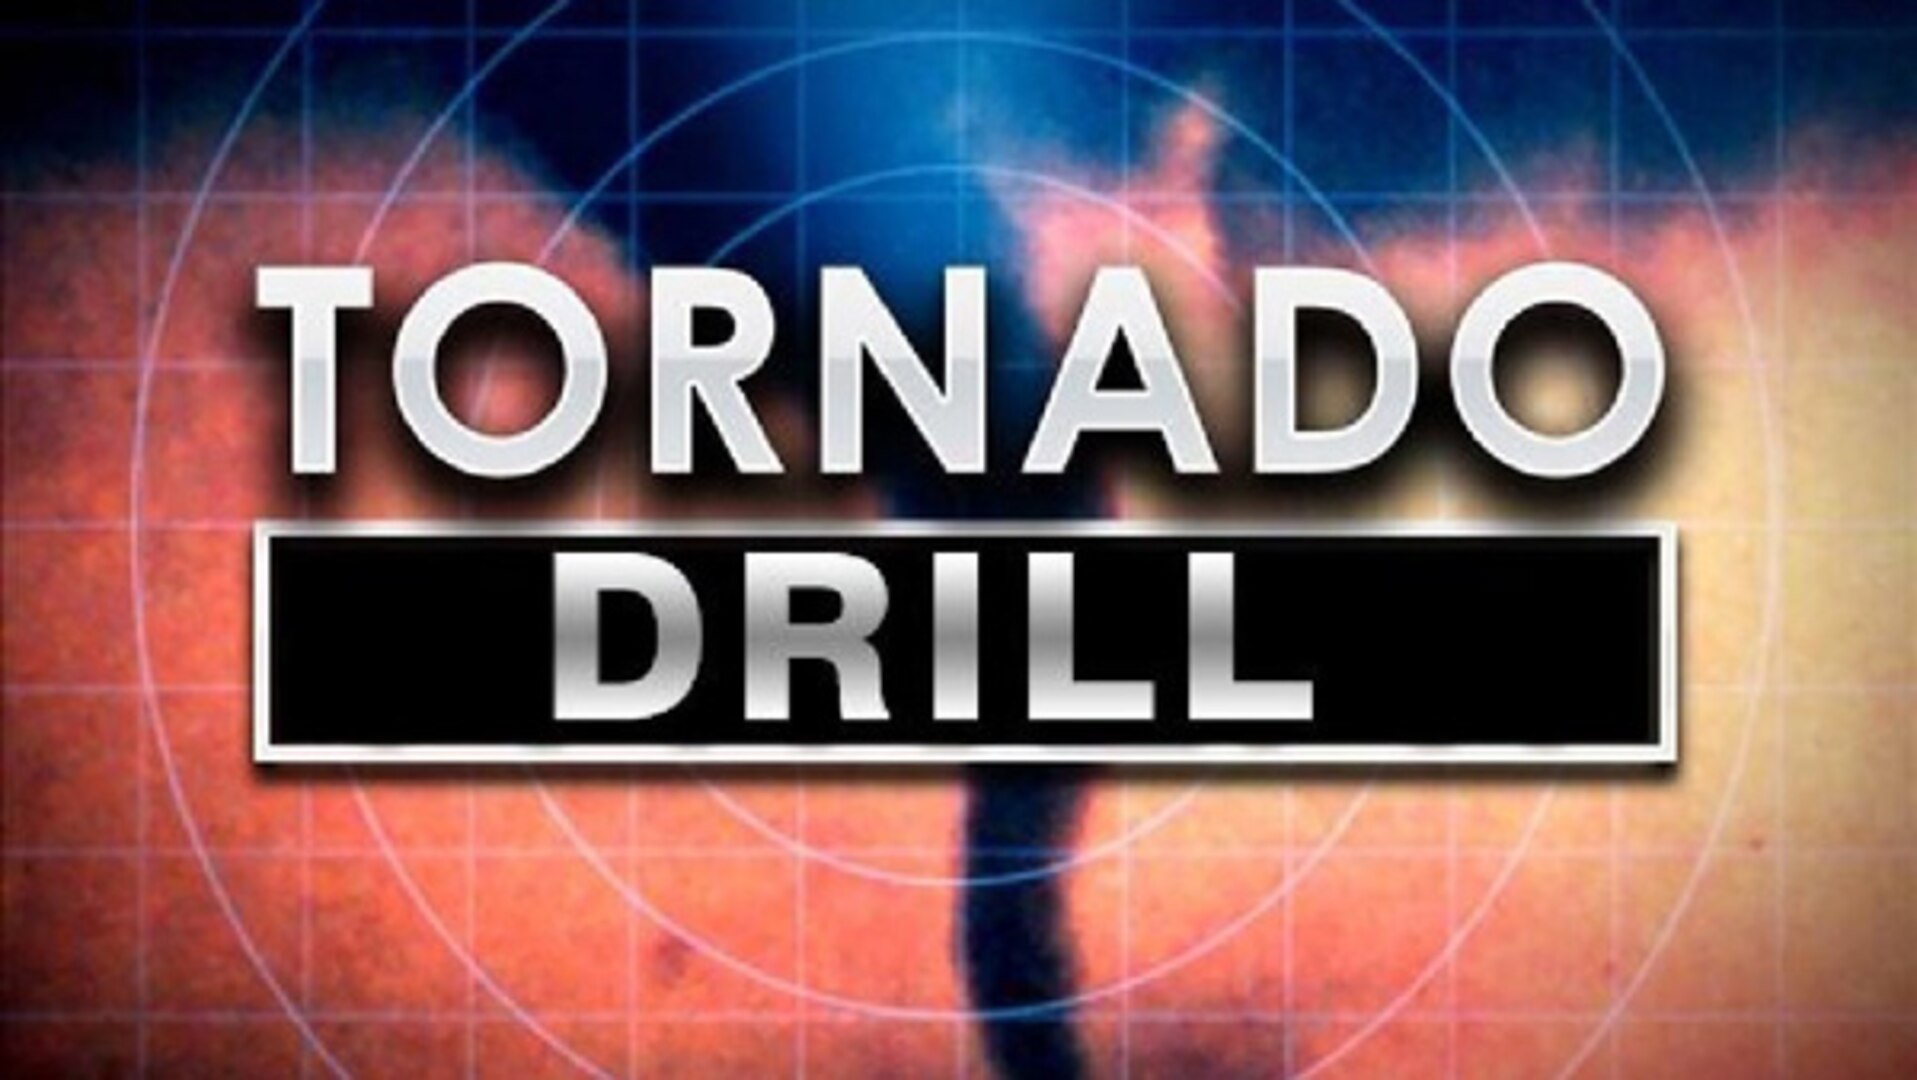 DSCR mass warning system to be tested during Virginia annual tornado drill March 16